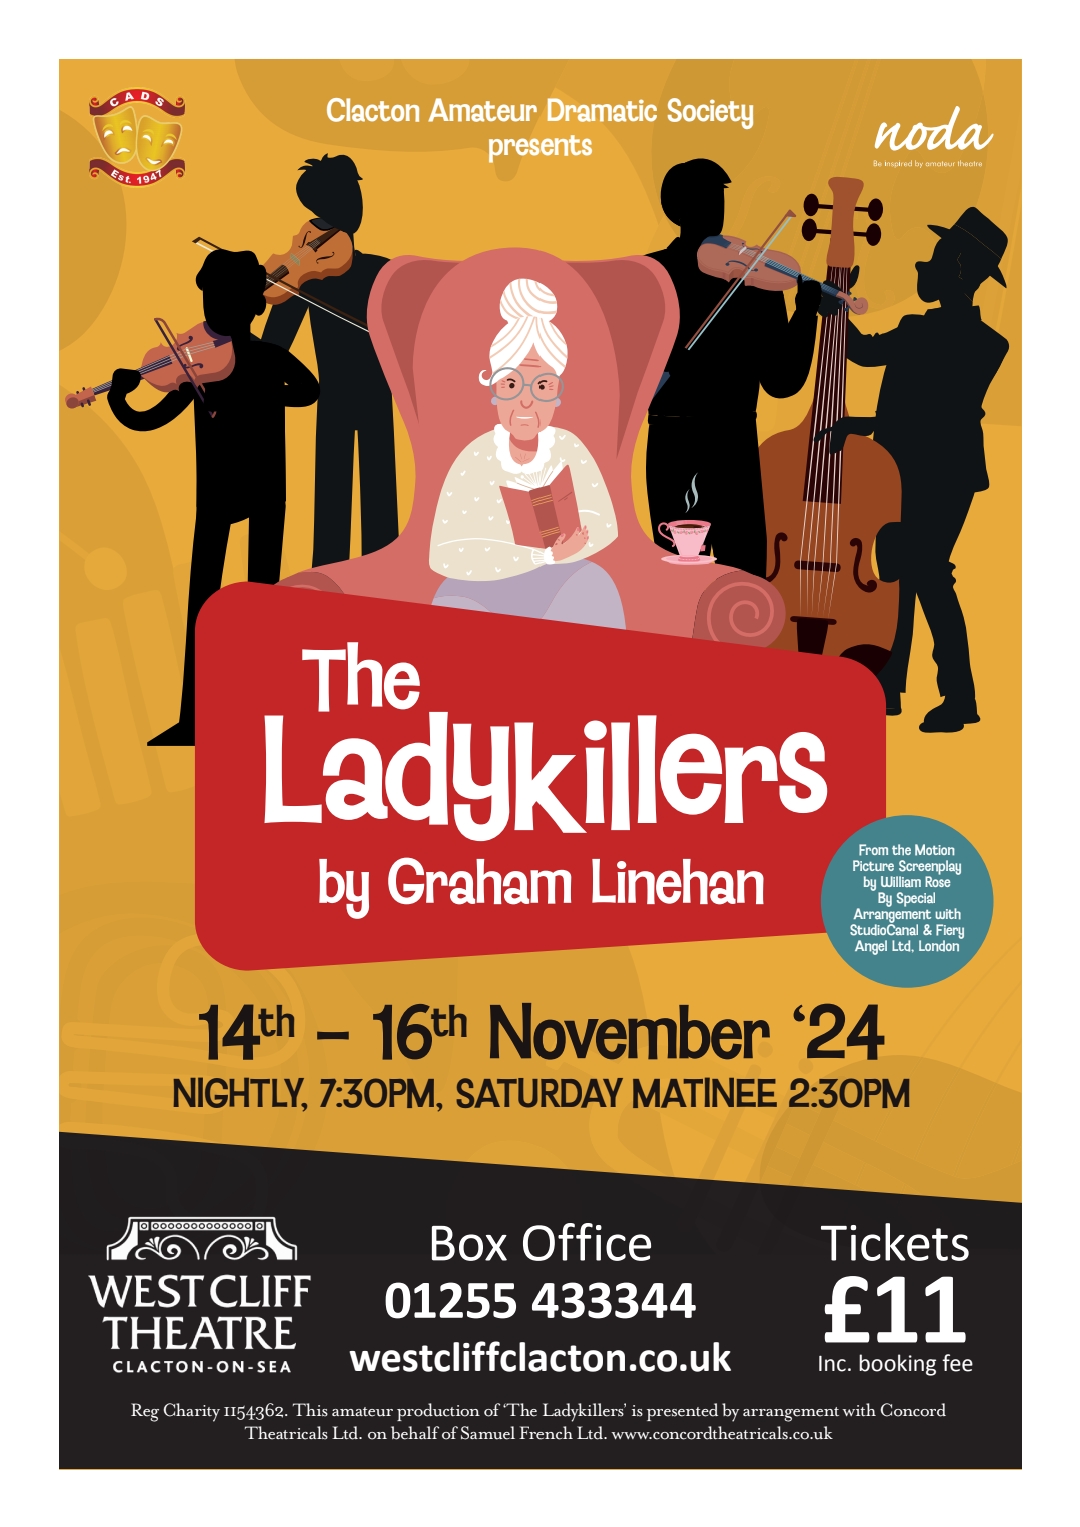 The LadyKillers